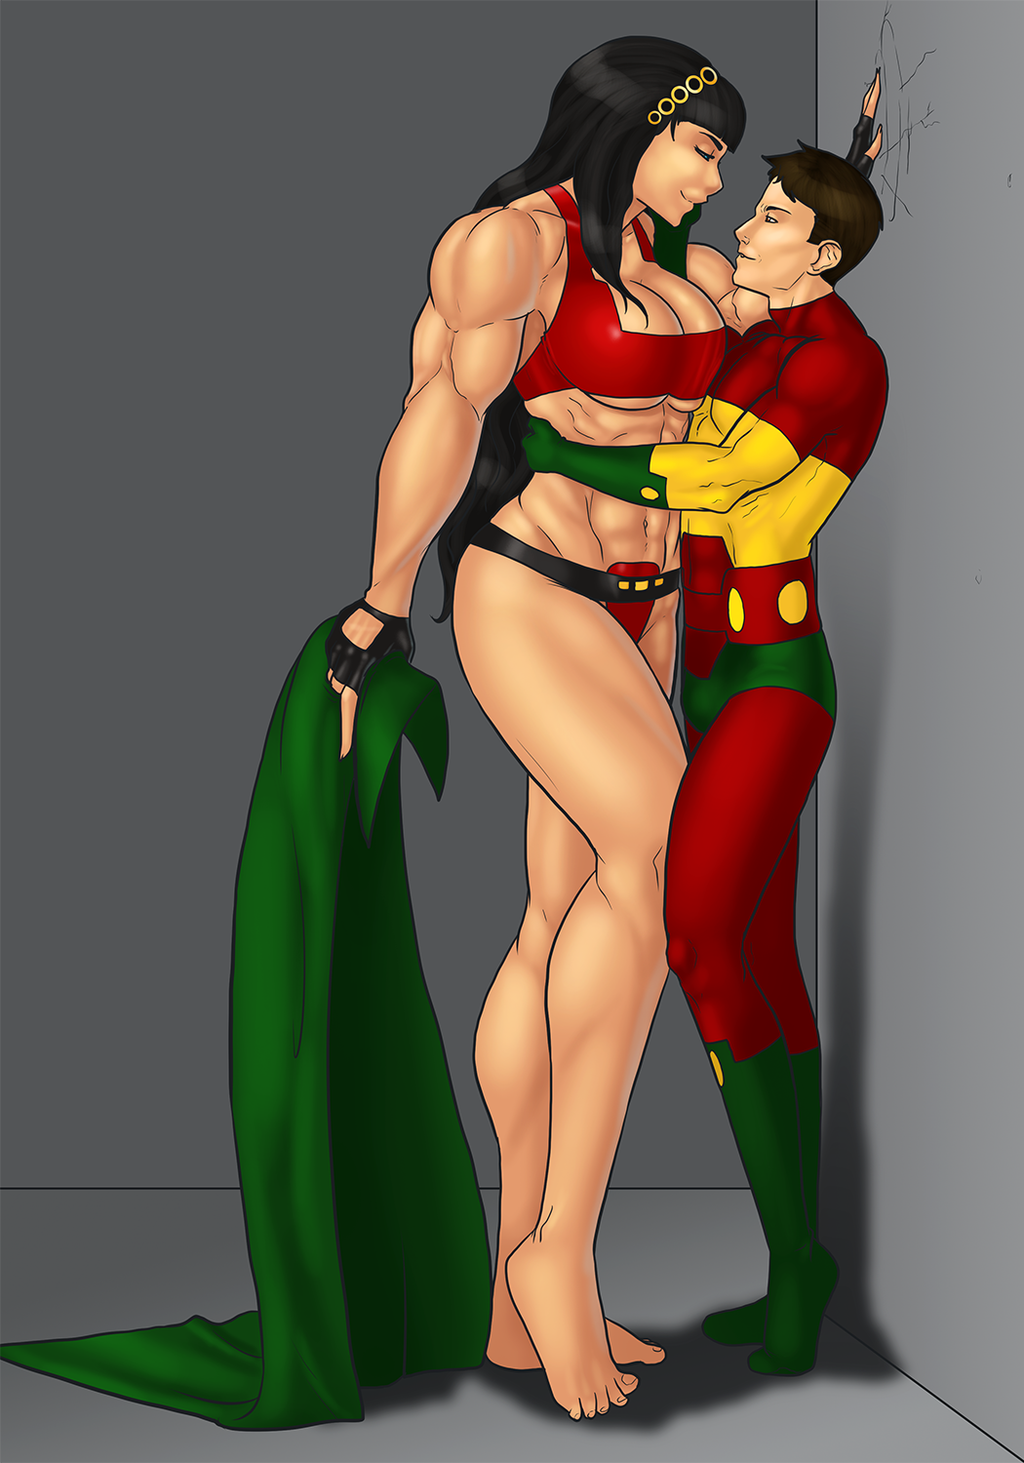 barda_and_scott_by_lexikimble_by_cerebus873-d7ndgg5.png.